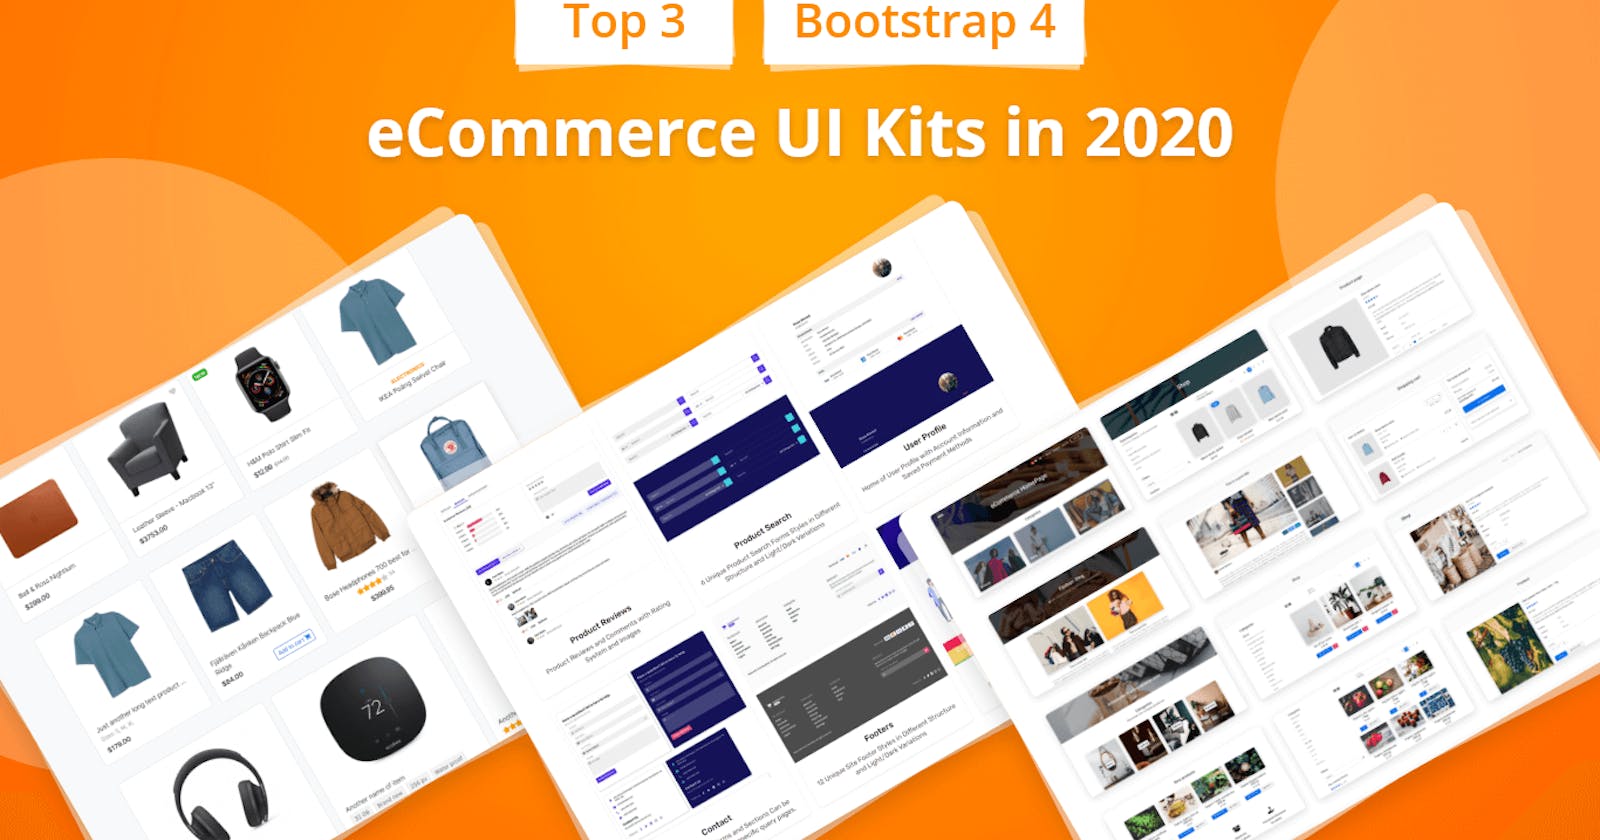 Top 3 eCommerce Bootstrap 4 UI Kits In 2021